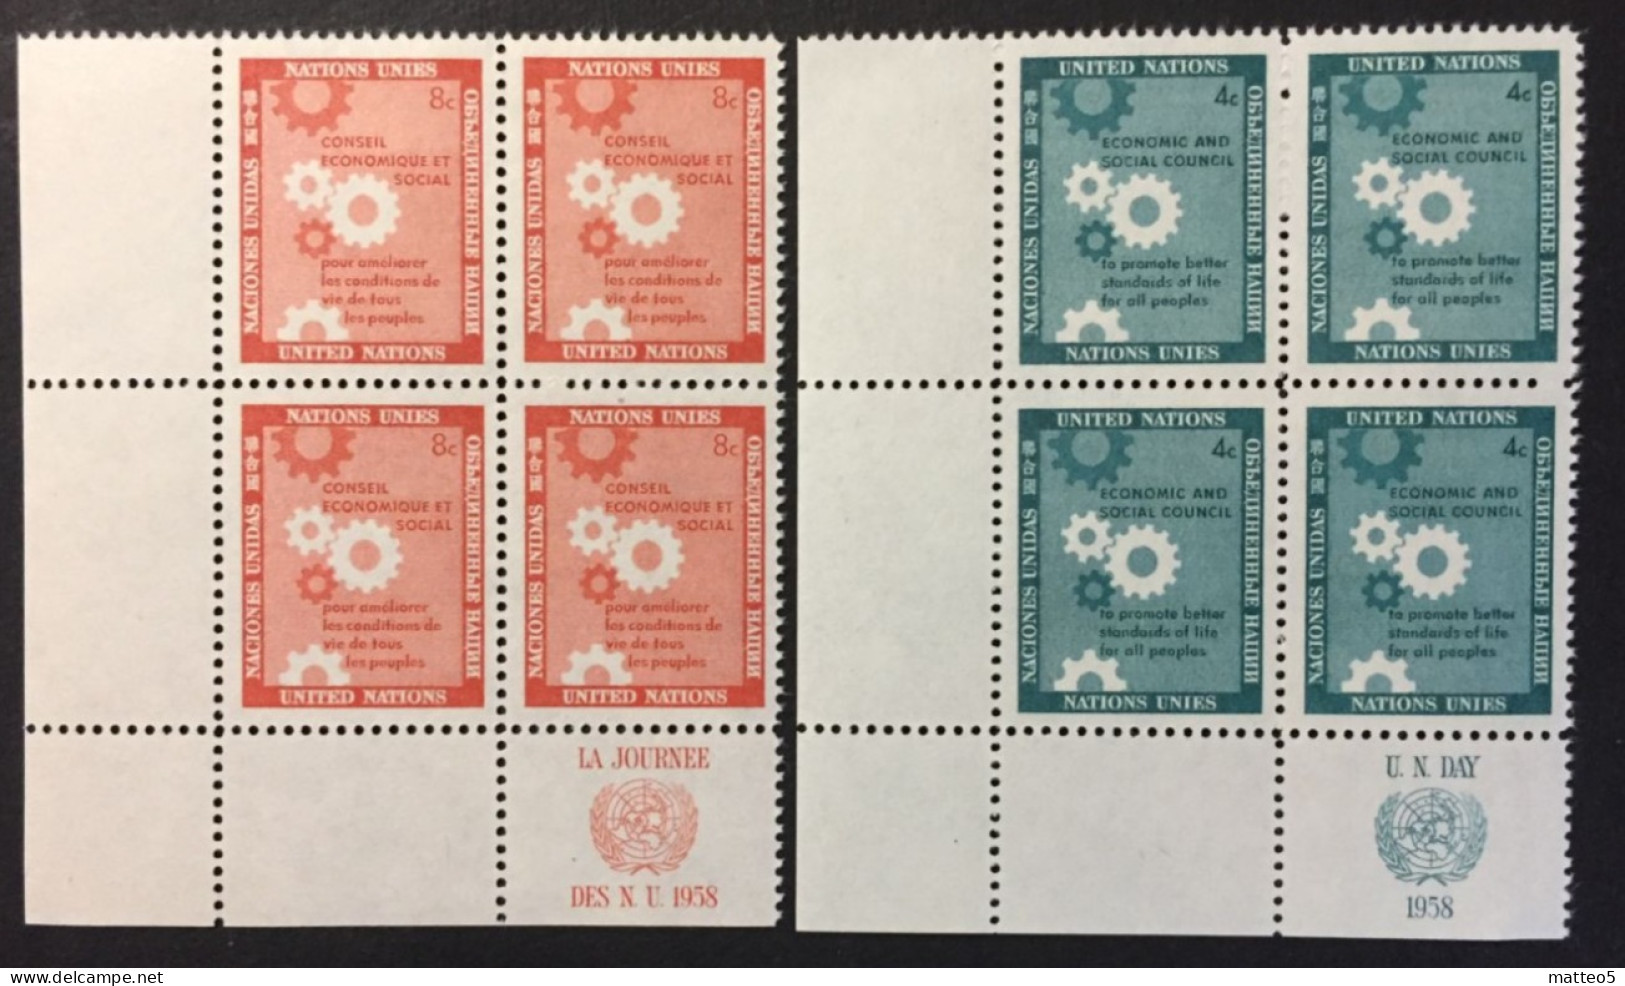 1958 - United Nations UNO UN ONU - Economic  And Social Council, Gearwheels - 2x4 Stamps   Unused - Ungebraucht